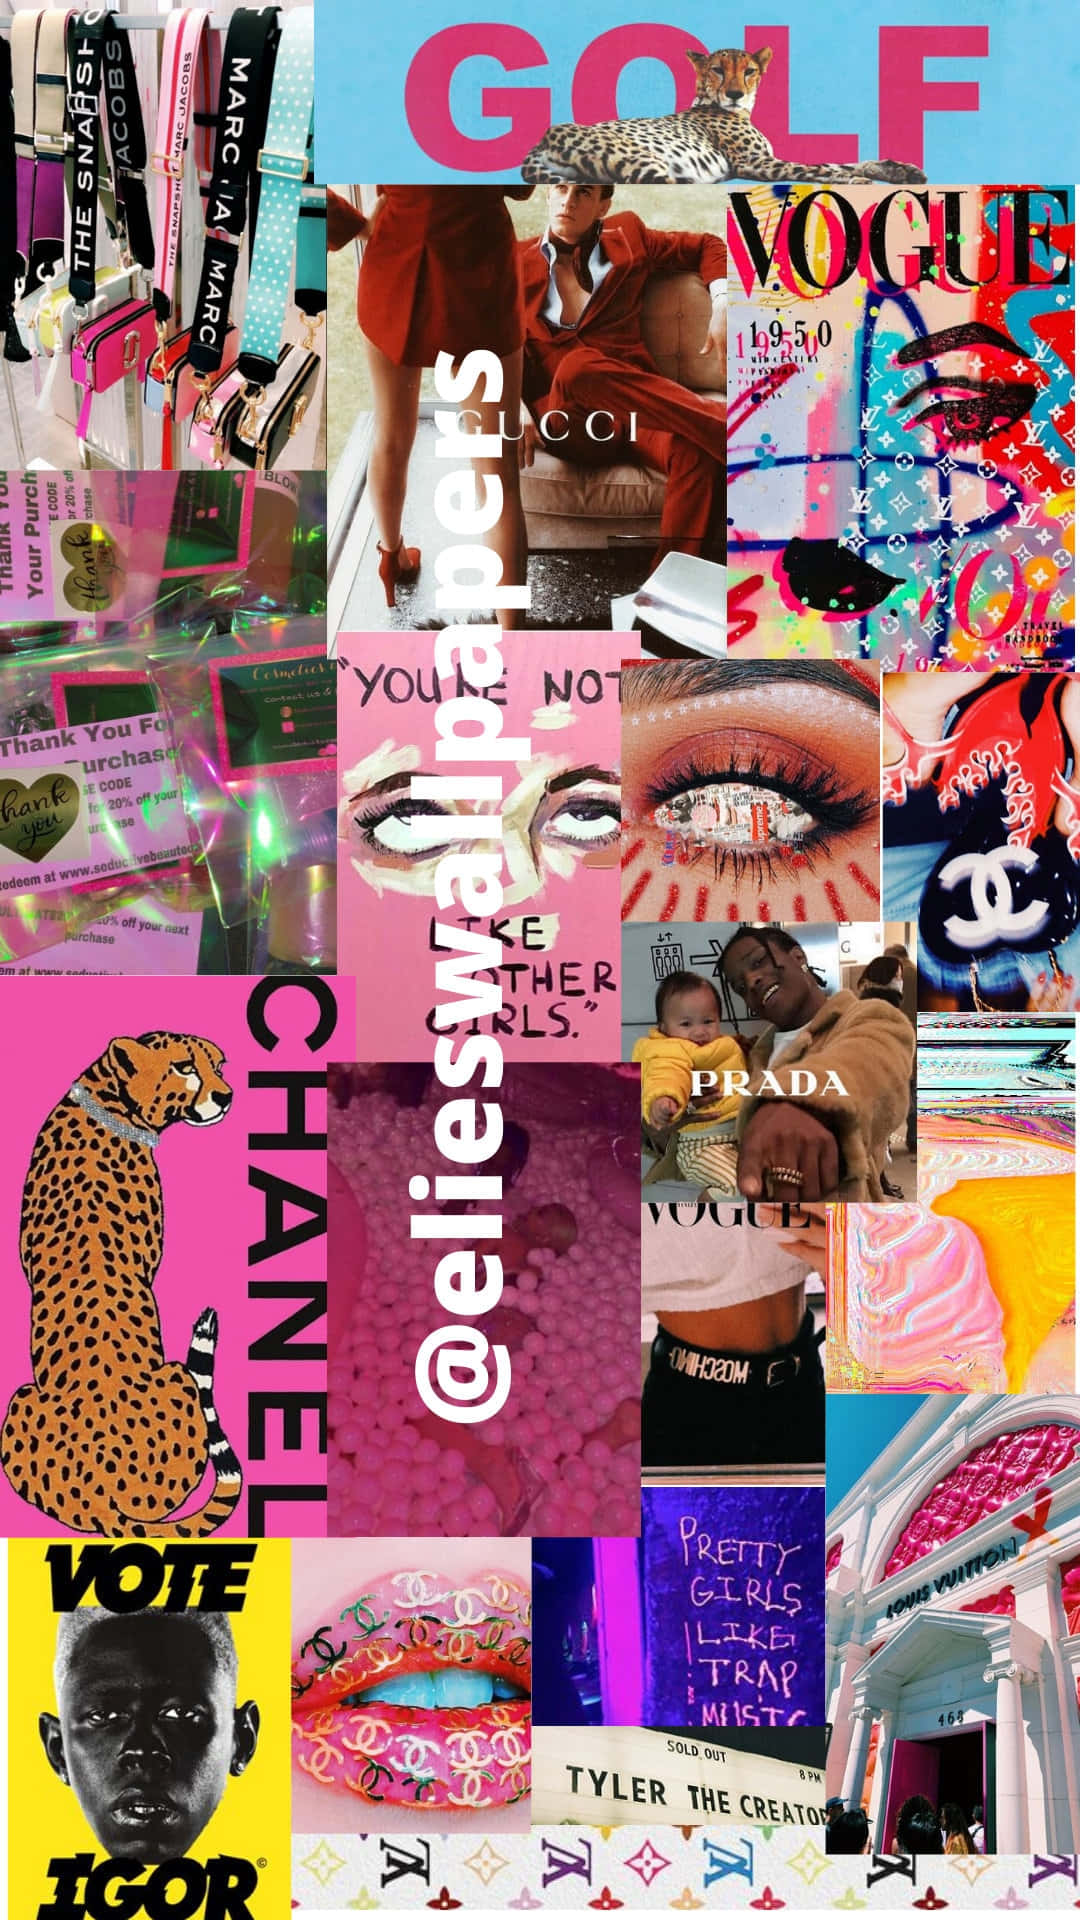 A Collage Of Various Images Of Chanel, Vogue, And Other Magazines Wallpaper